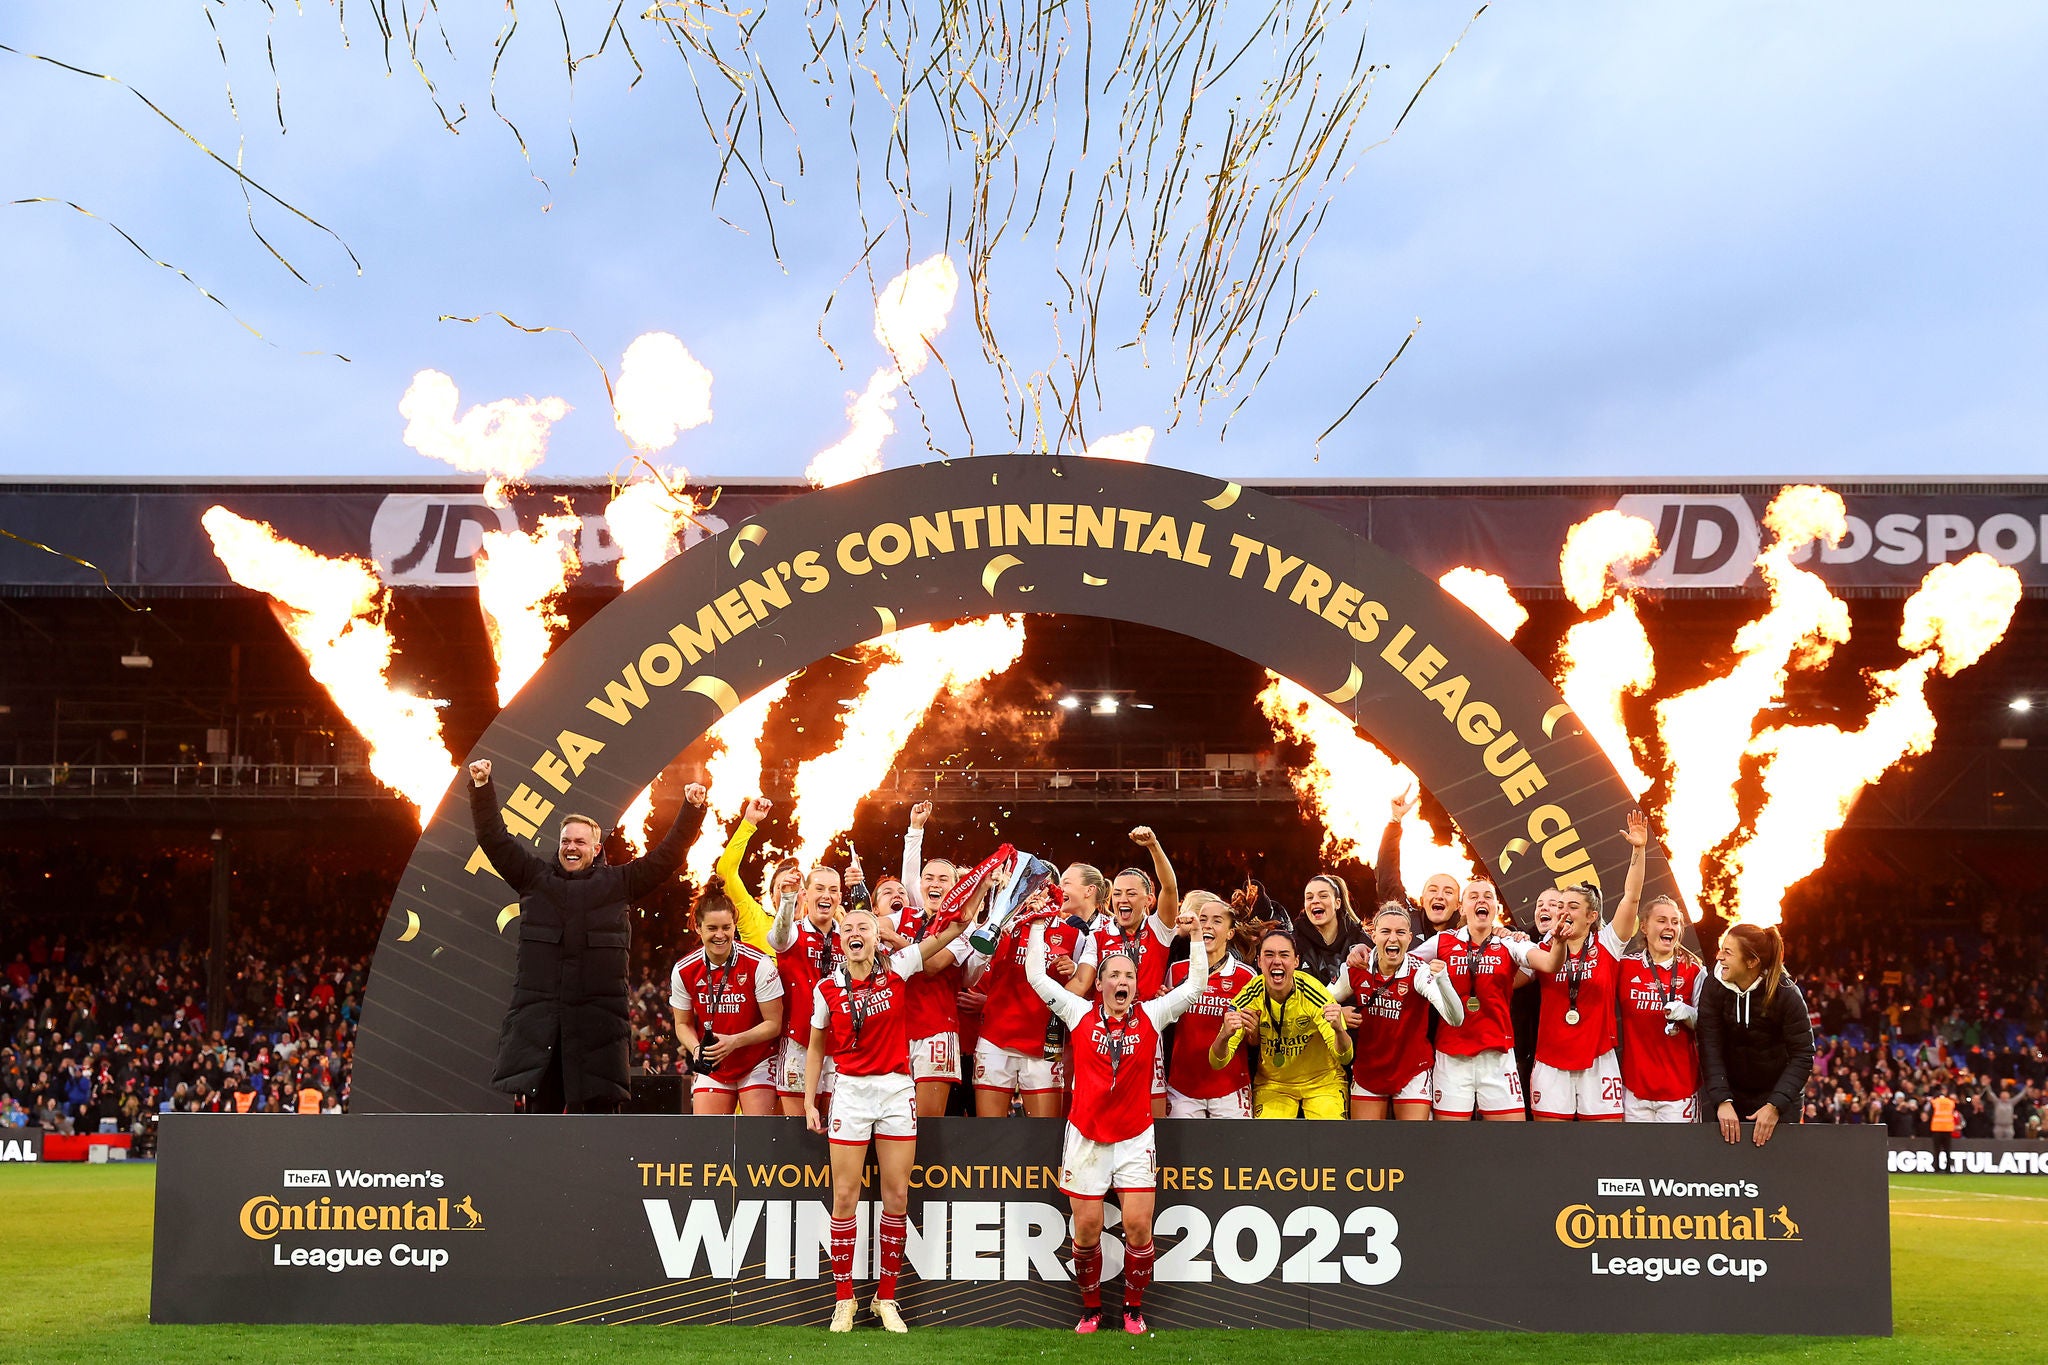 LONDON, ENGLAND - MARCH 05: Kim Little and Leah Williamson of Arsenal lift the FA Women's Continental Tyres League Cup trophy following the FA Women's Continental Tyres League Cup Final match between Chelsea and Arsenal at Selhurst Park on March 05, 2023 in London, England. (Photo by Catherine Ivill - The FA/The FA via Getty Images)